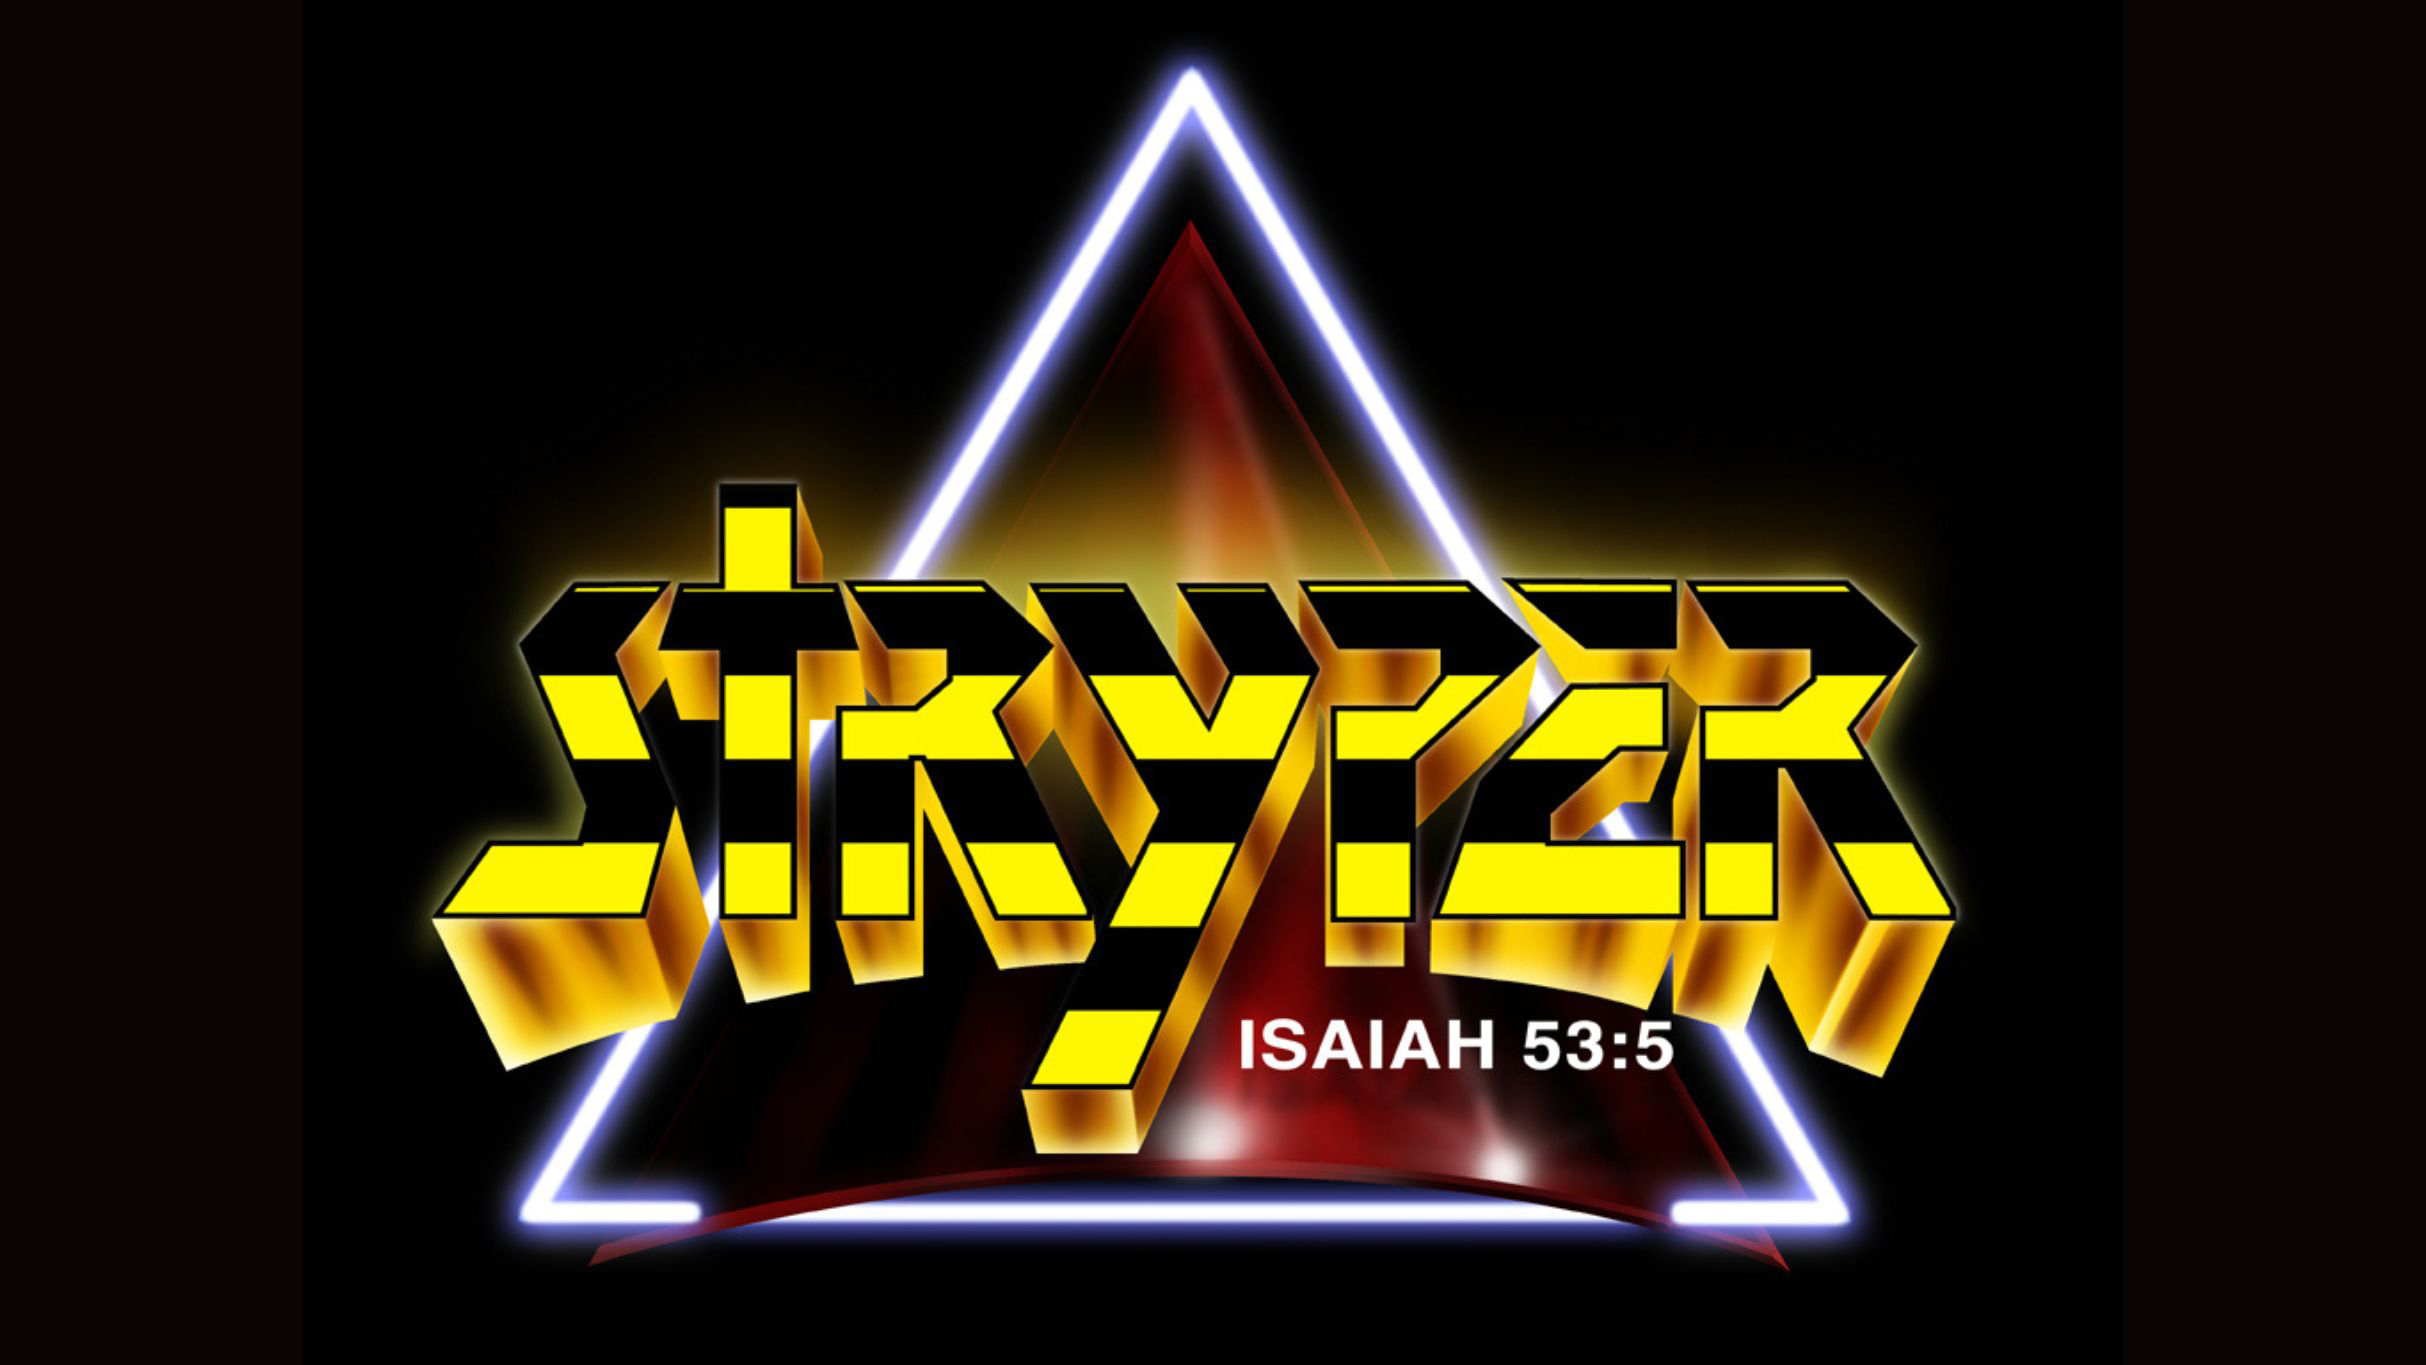 Stryper "To Hell with the Amps - The Unplugged Tour"